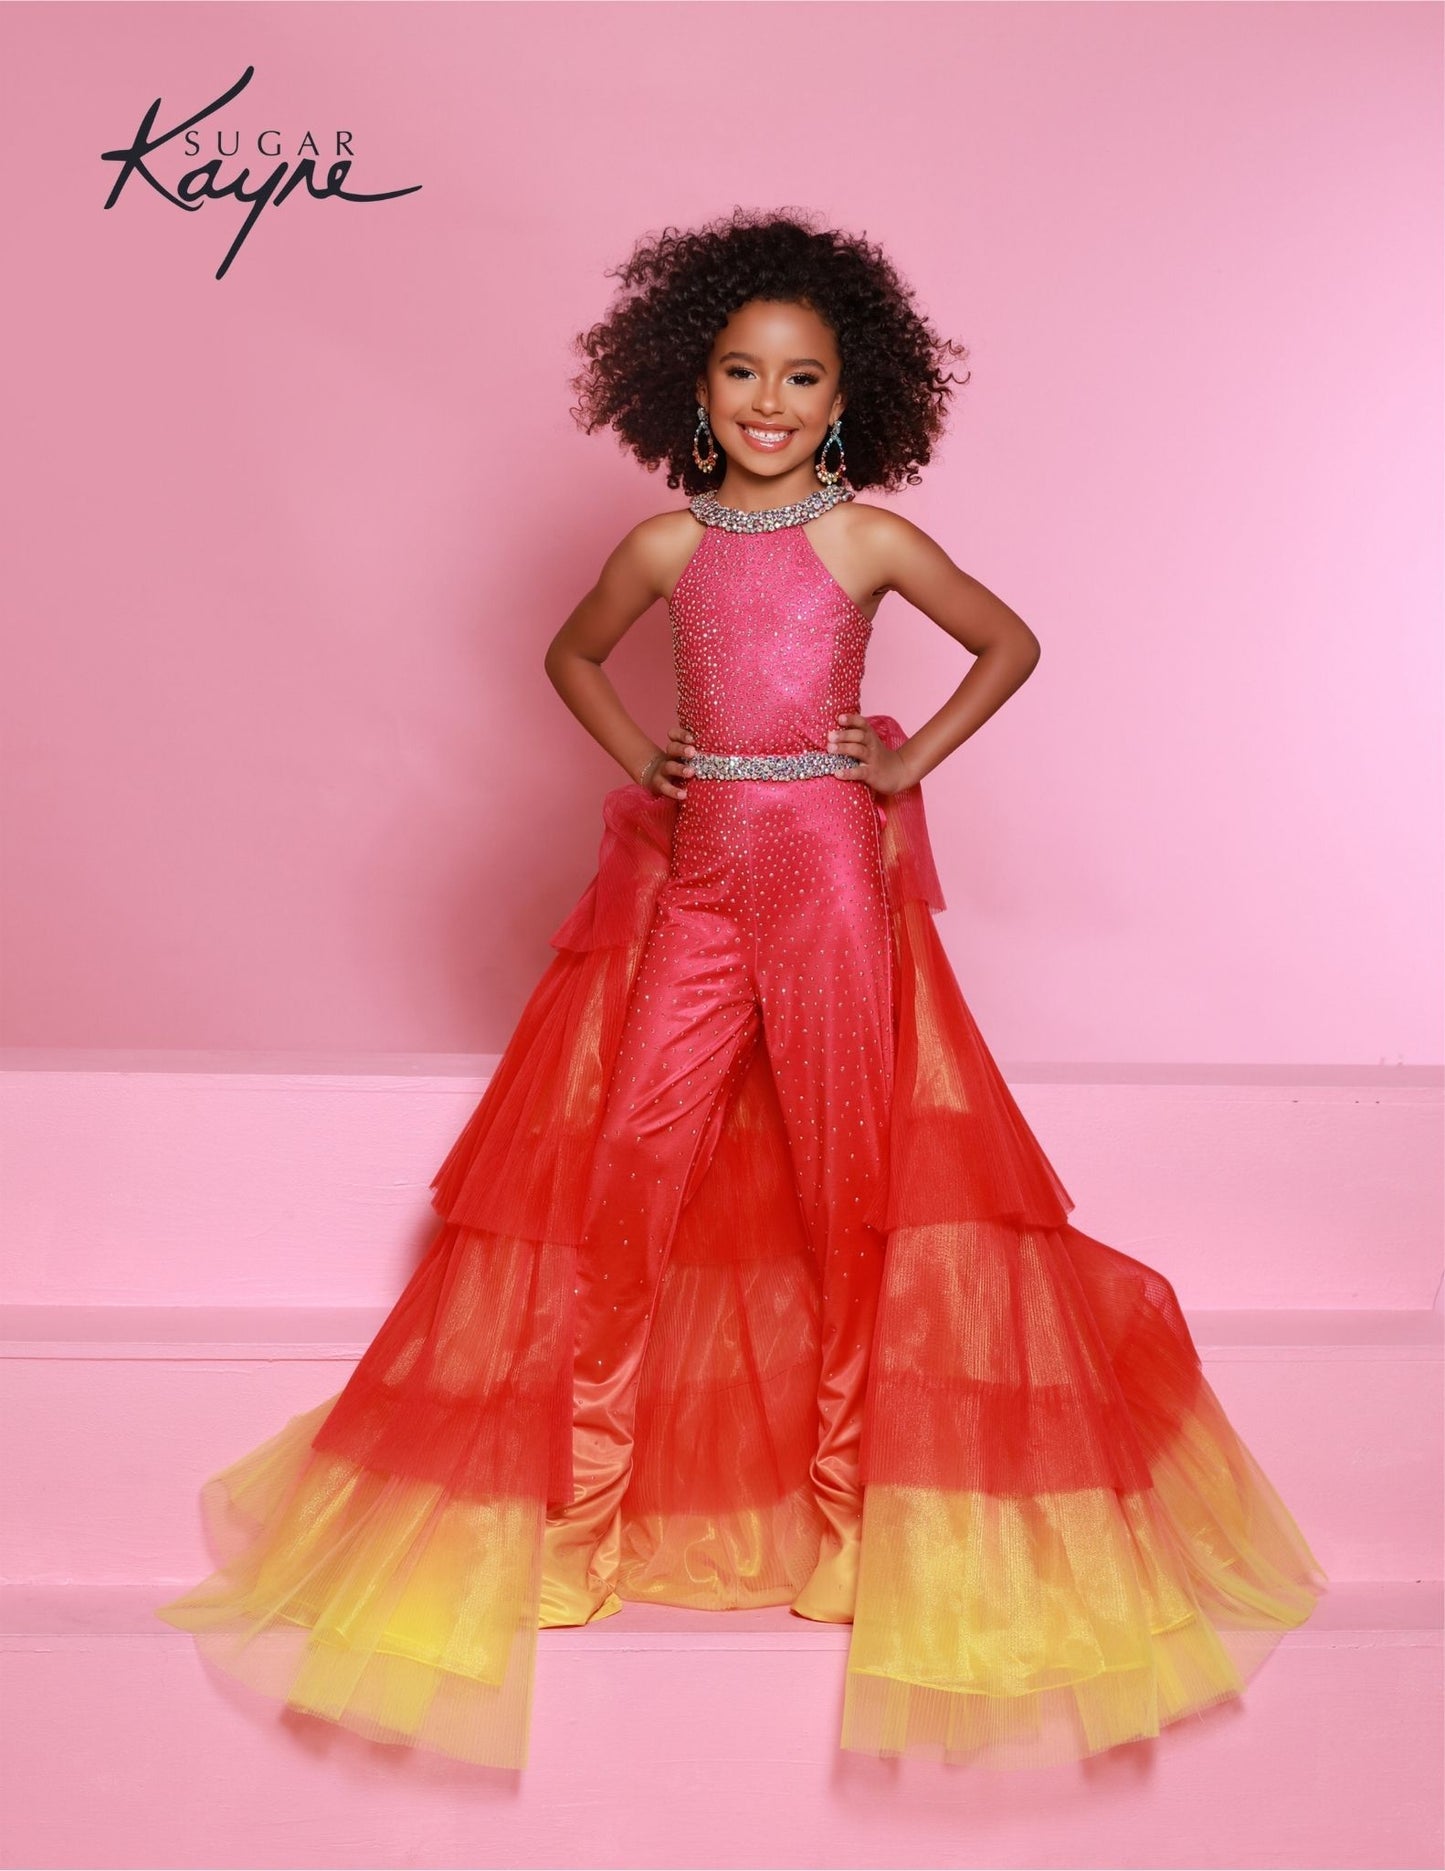 Sugar Kayne C301 Ombre Crystal Girls Pageant Jumpsuit Overskirt Ruffle Fun Fashion Detachable